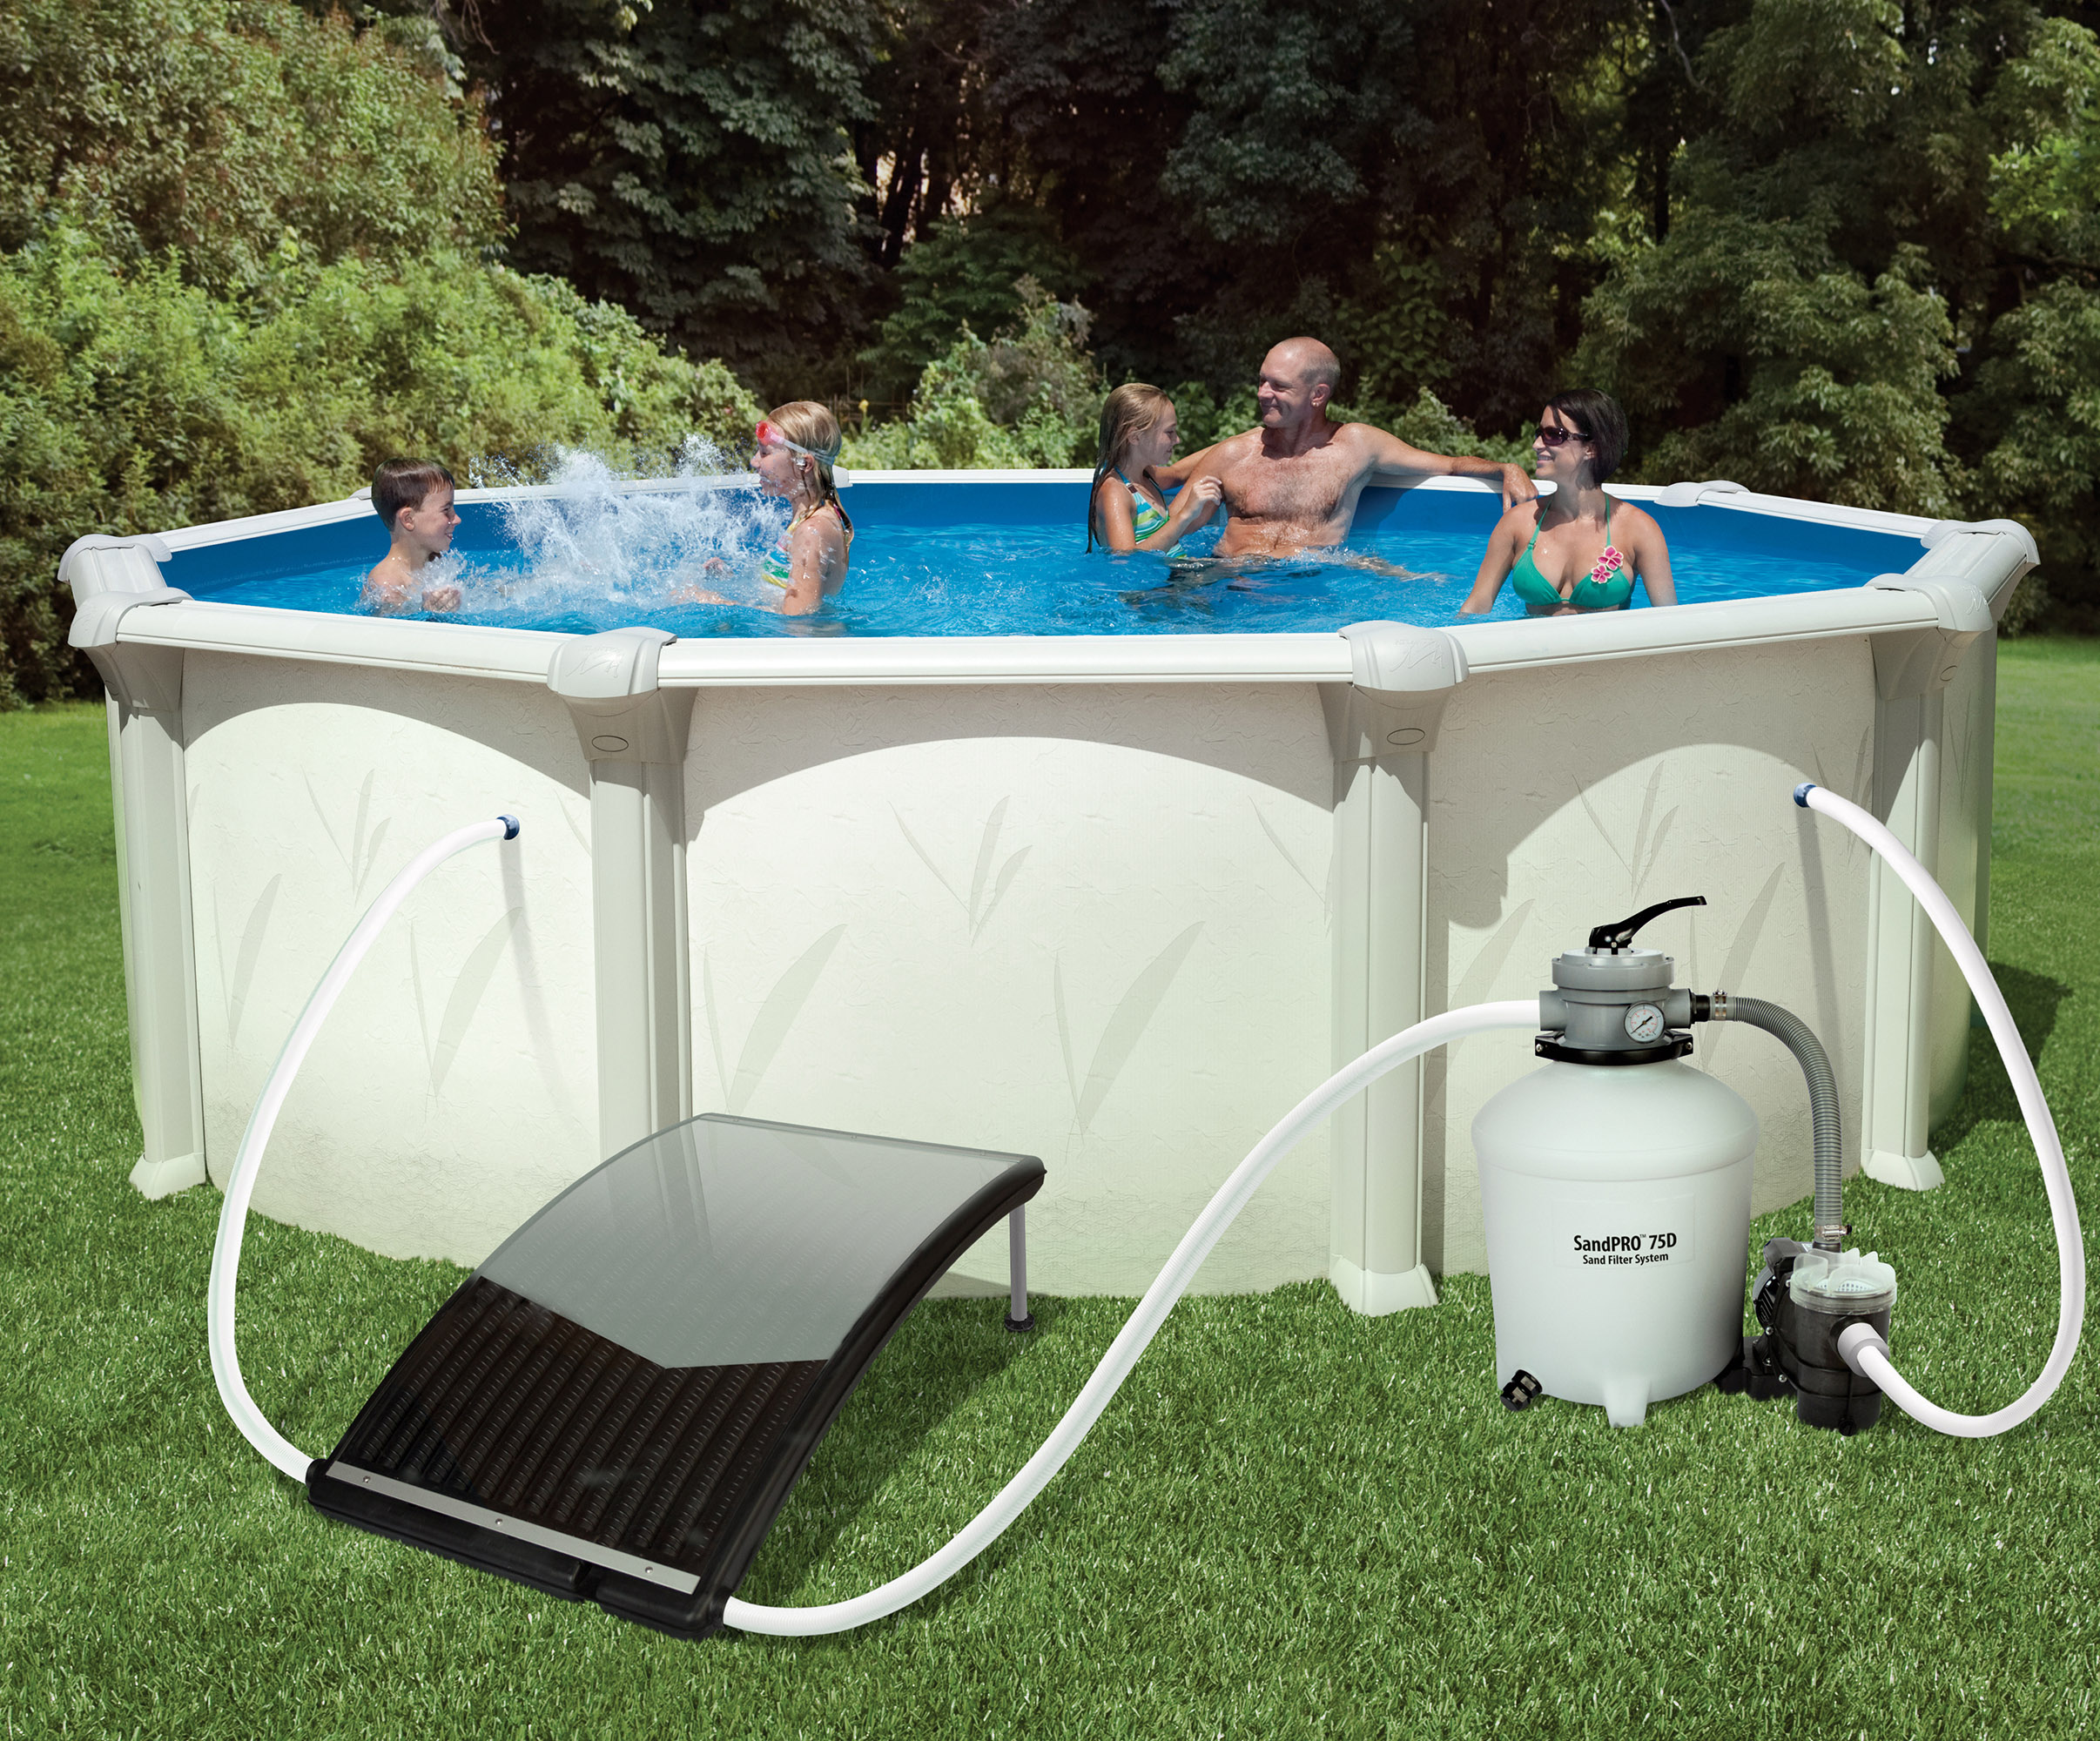 pool-heating-the-main-question-and-advantages-within-the-solar-method